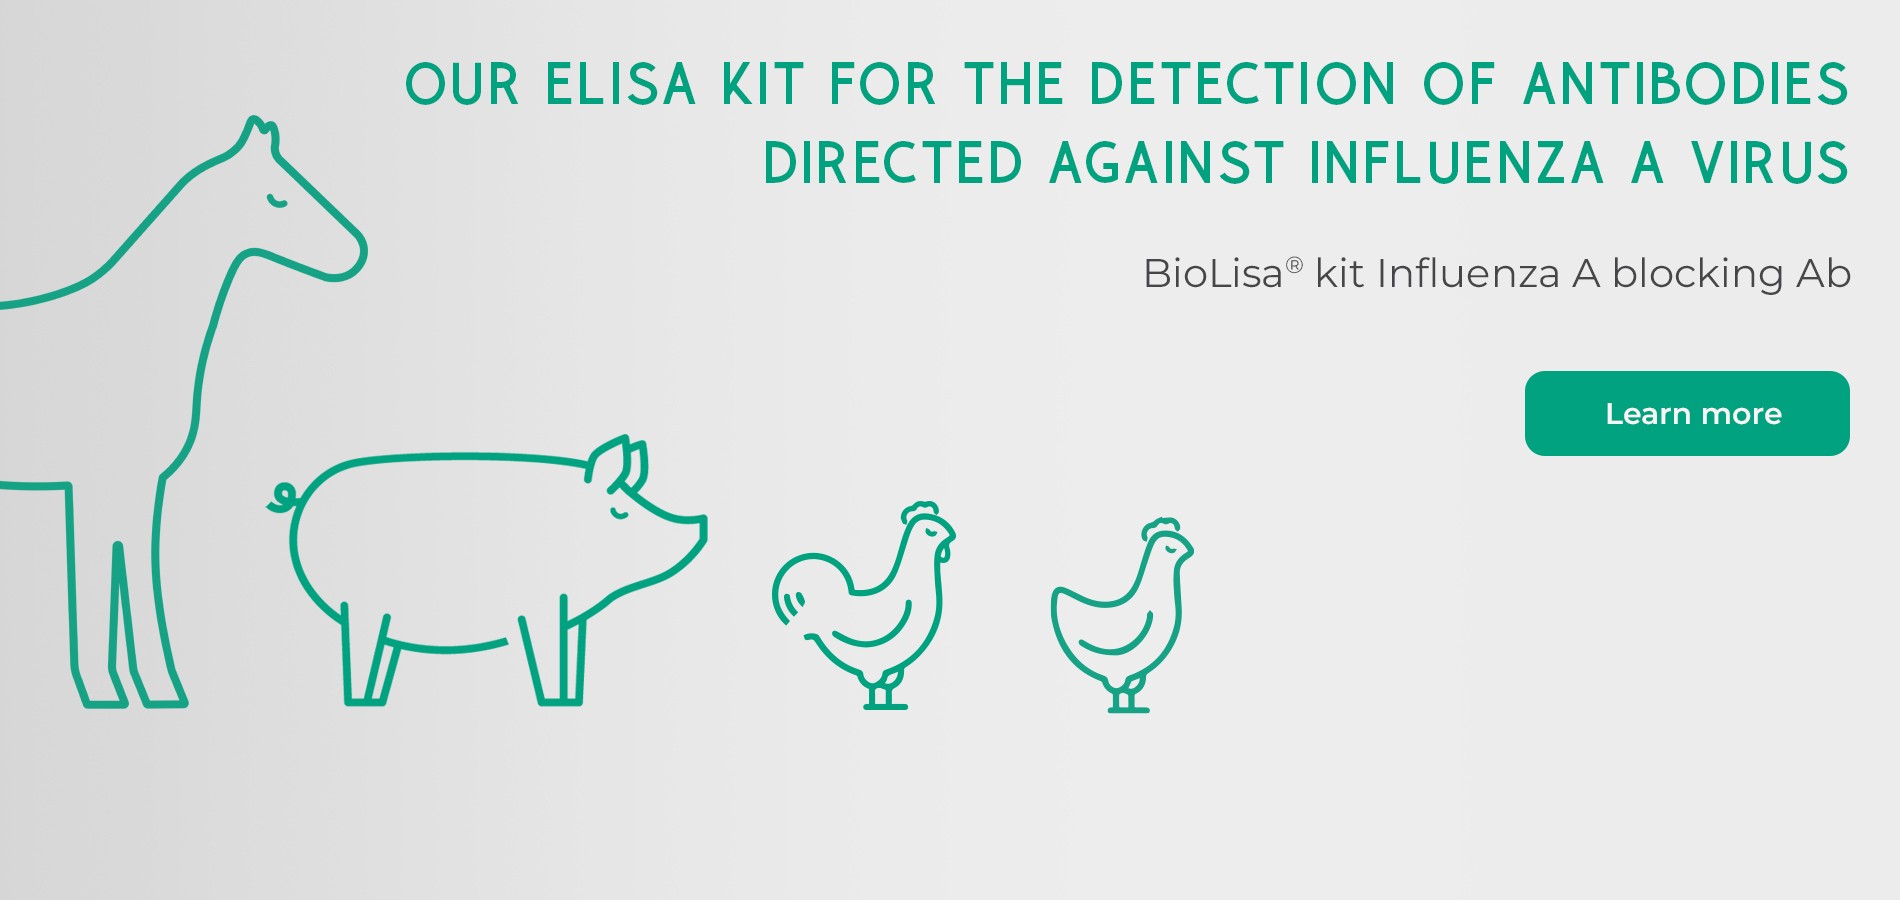 ELISA kit for the detection of antibodies directed against Influenza A virus